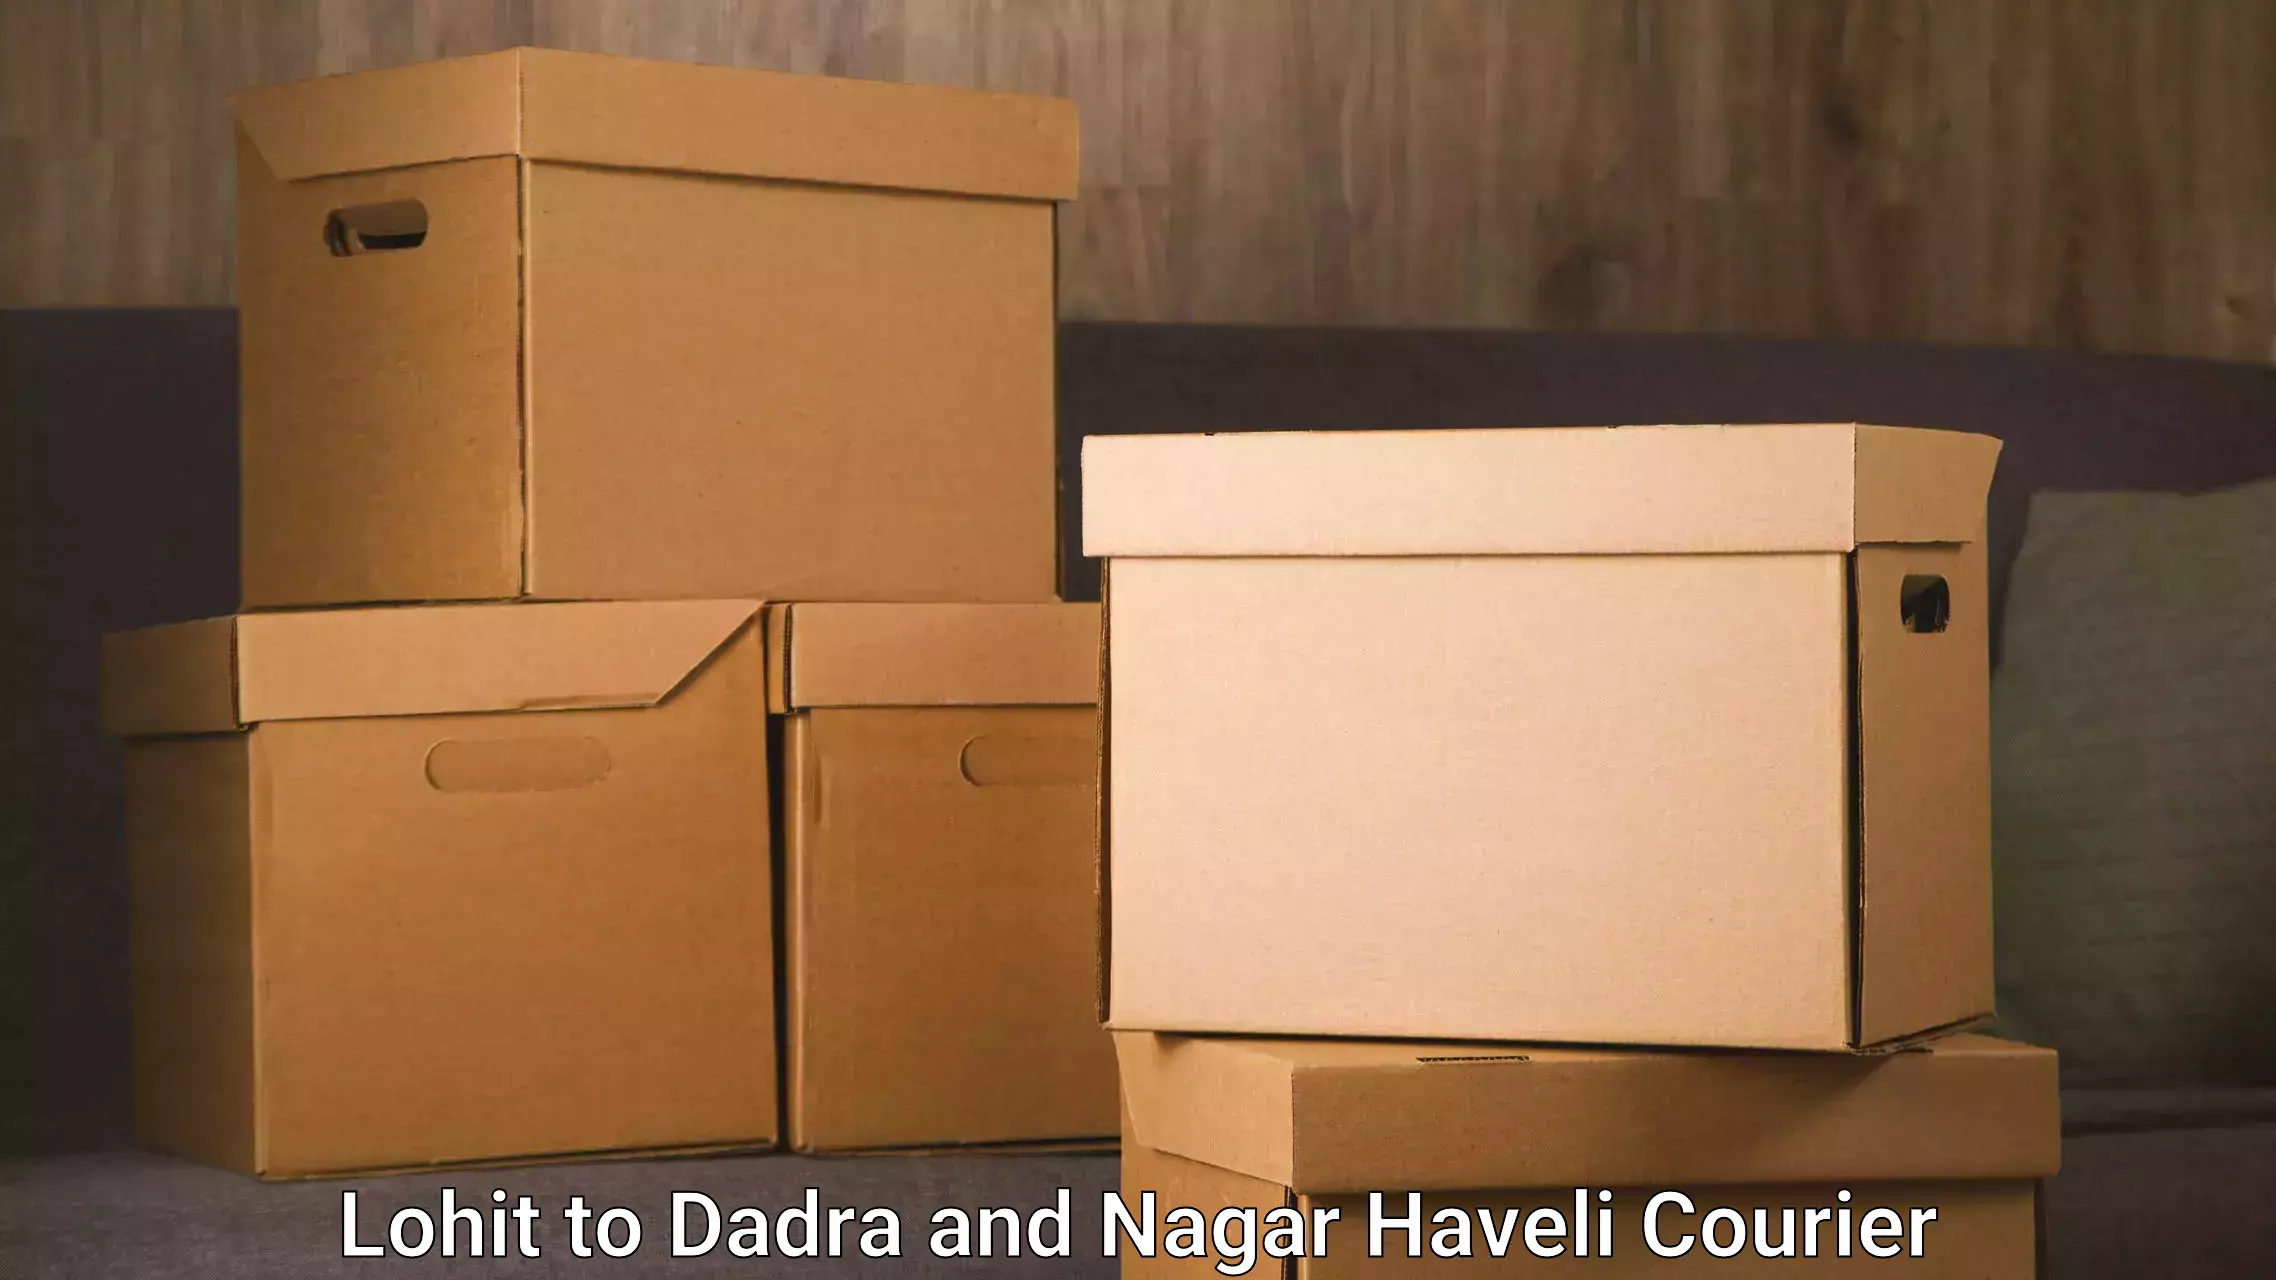 Courier service partnerships Lohit to Dadra and Nagar Haveli